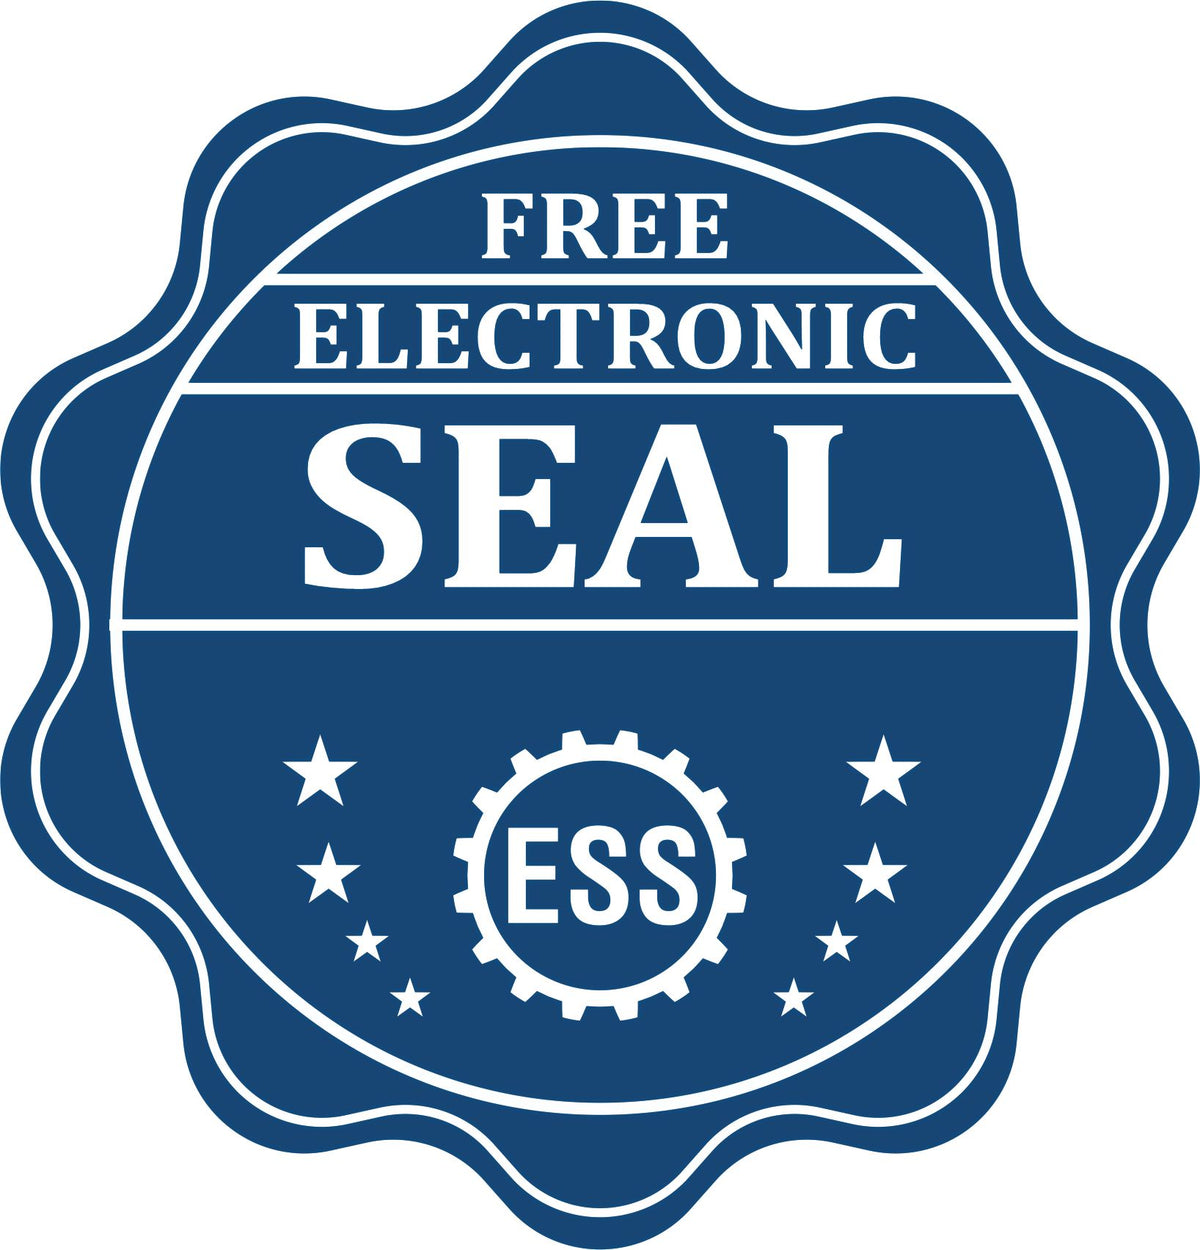 A badge showing a free electronic seal for the Premium MaxLight Pre-Inked Idaho Geology Stamp with stars and the ESS gear on the emblem.